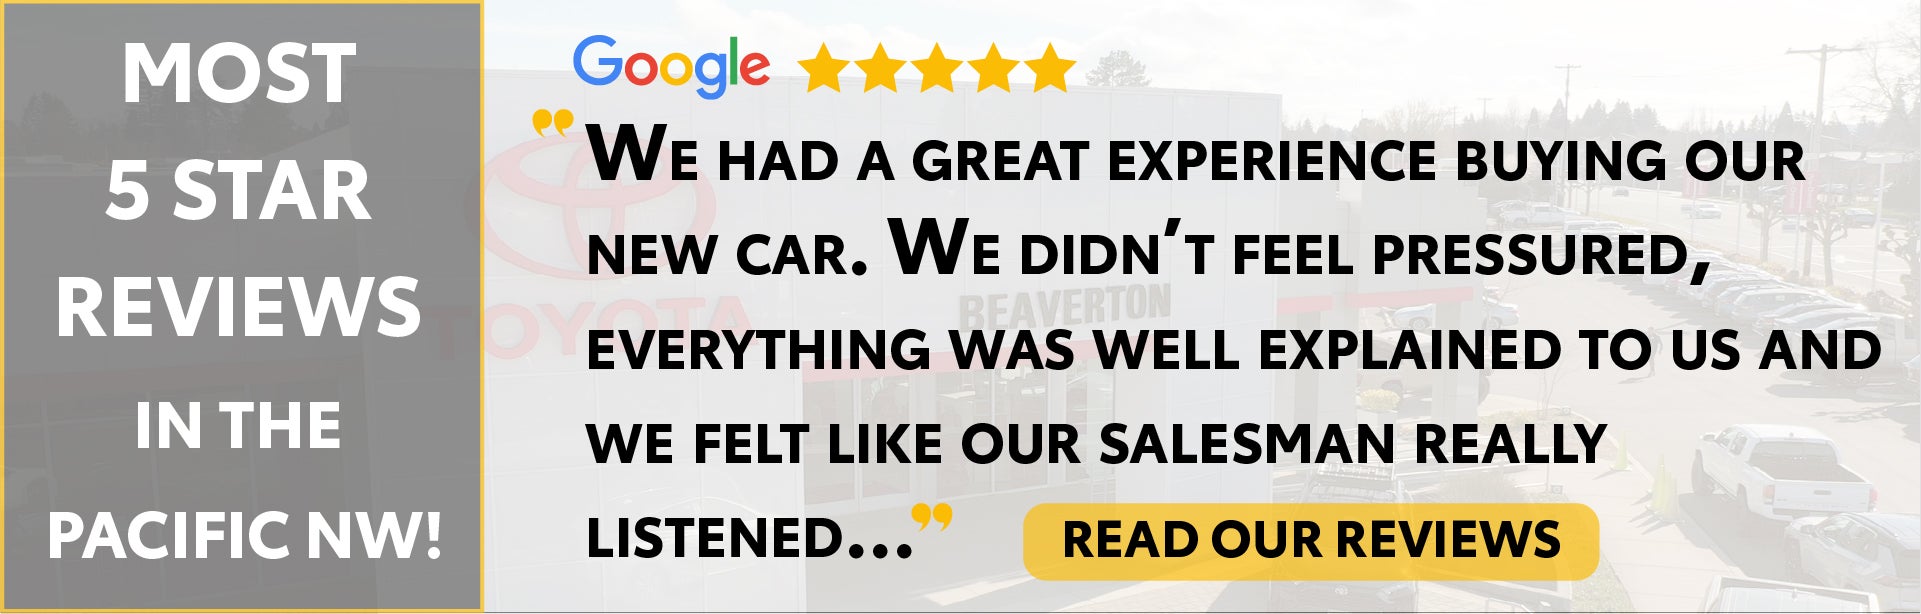 Beaverton Toyota - Most 5 star reviews in the pacific NW!